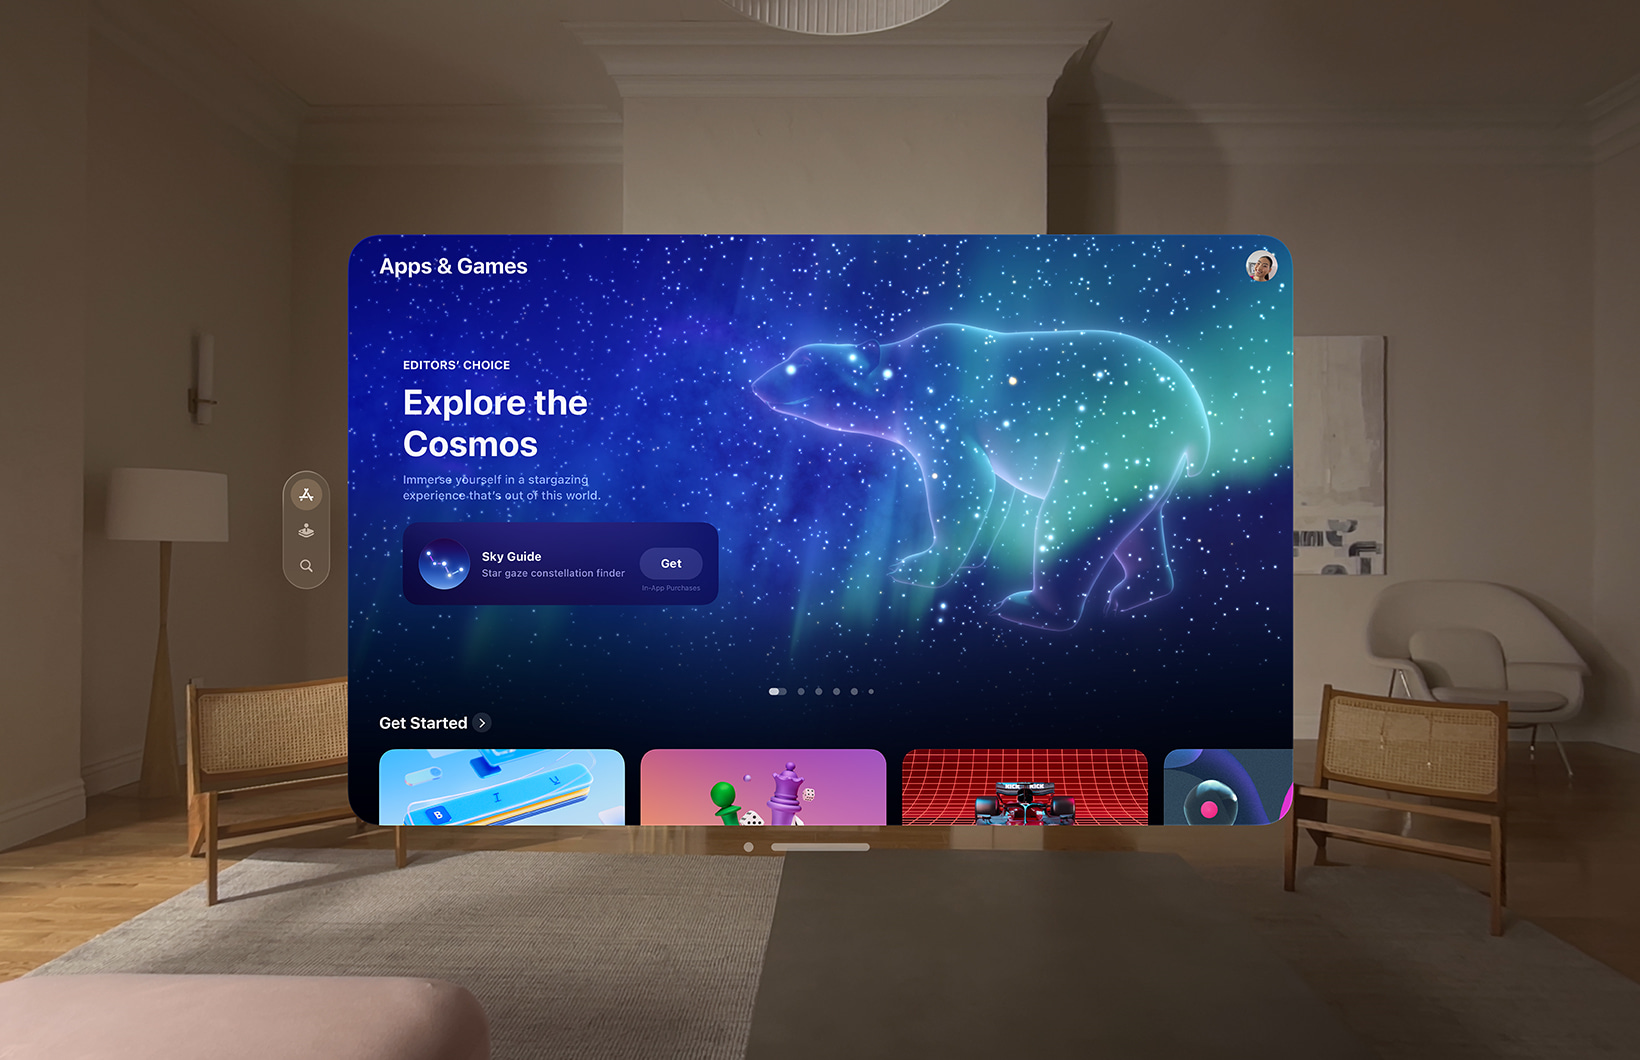 A screenshot of the App Store for Apple Vision Pro as it appears in a living room. The screenshot contains a large image of the Ursa Major constellation with the headline “Explore the Cosmos.”